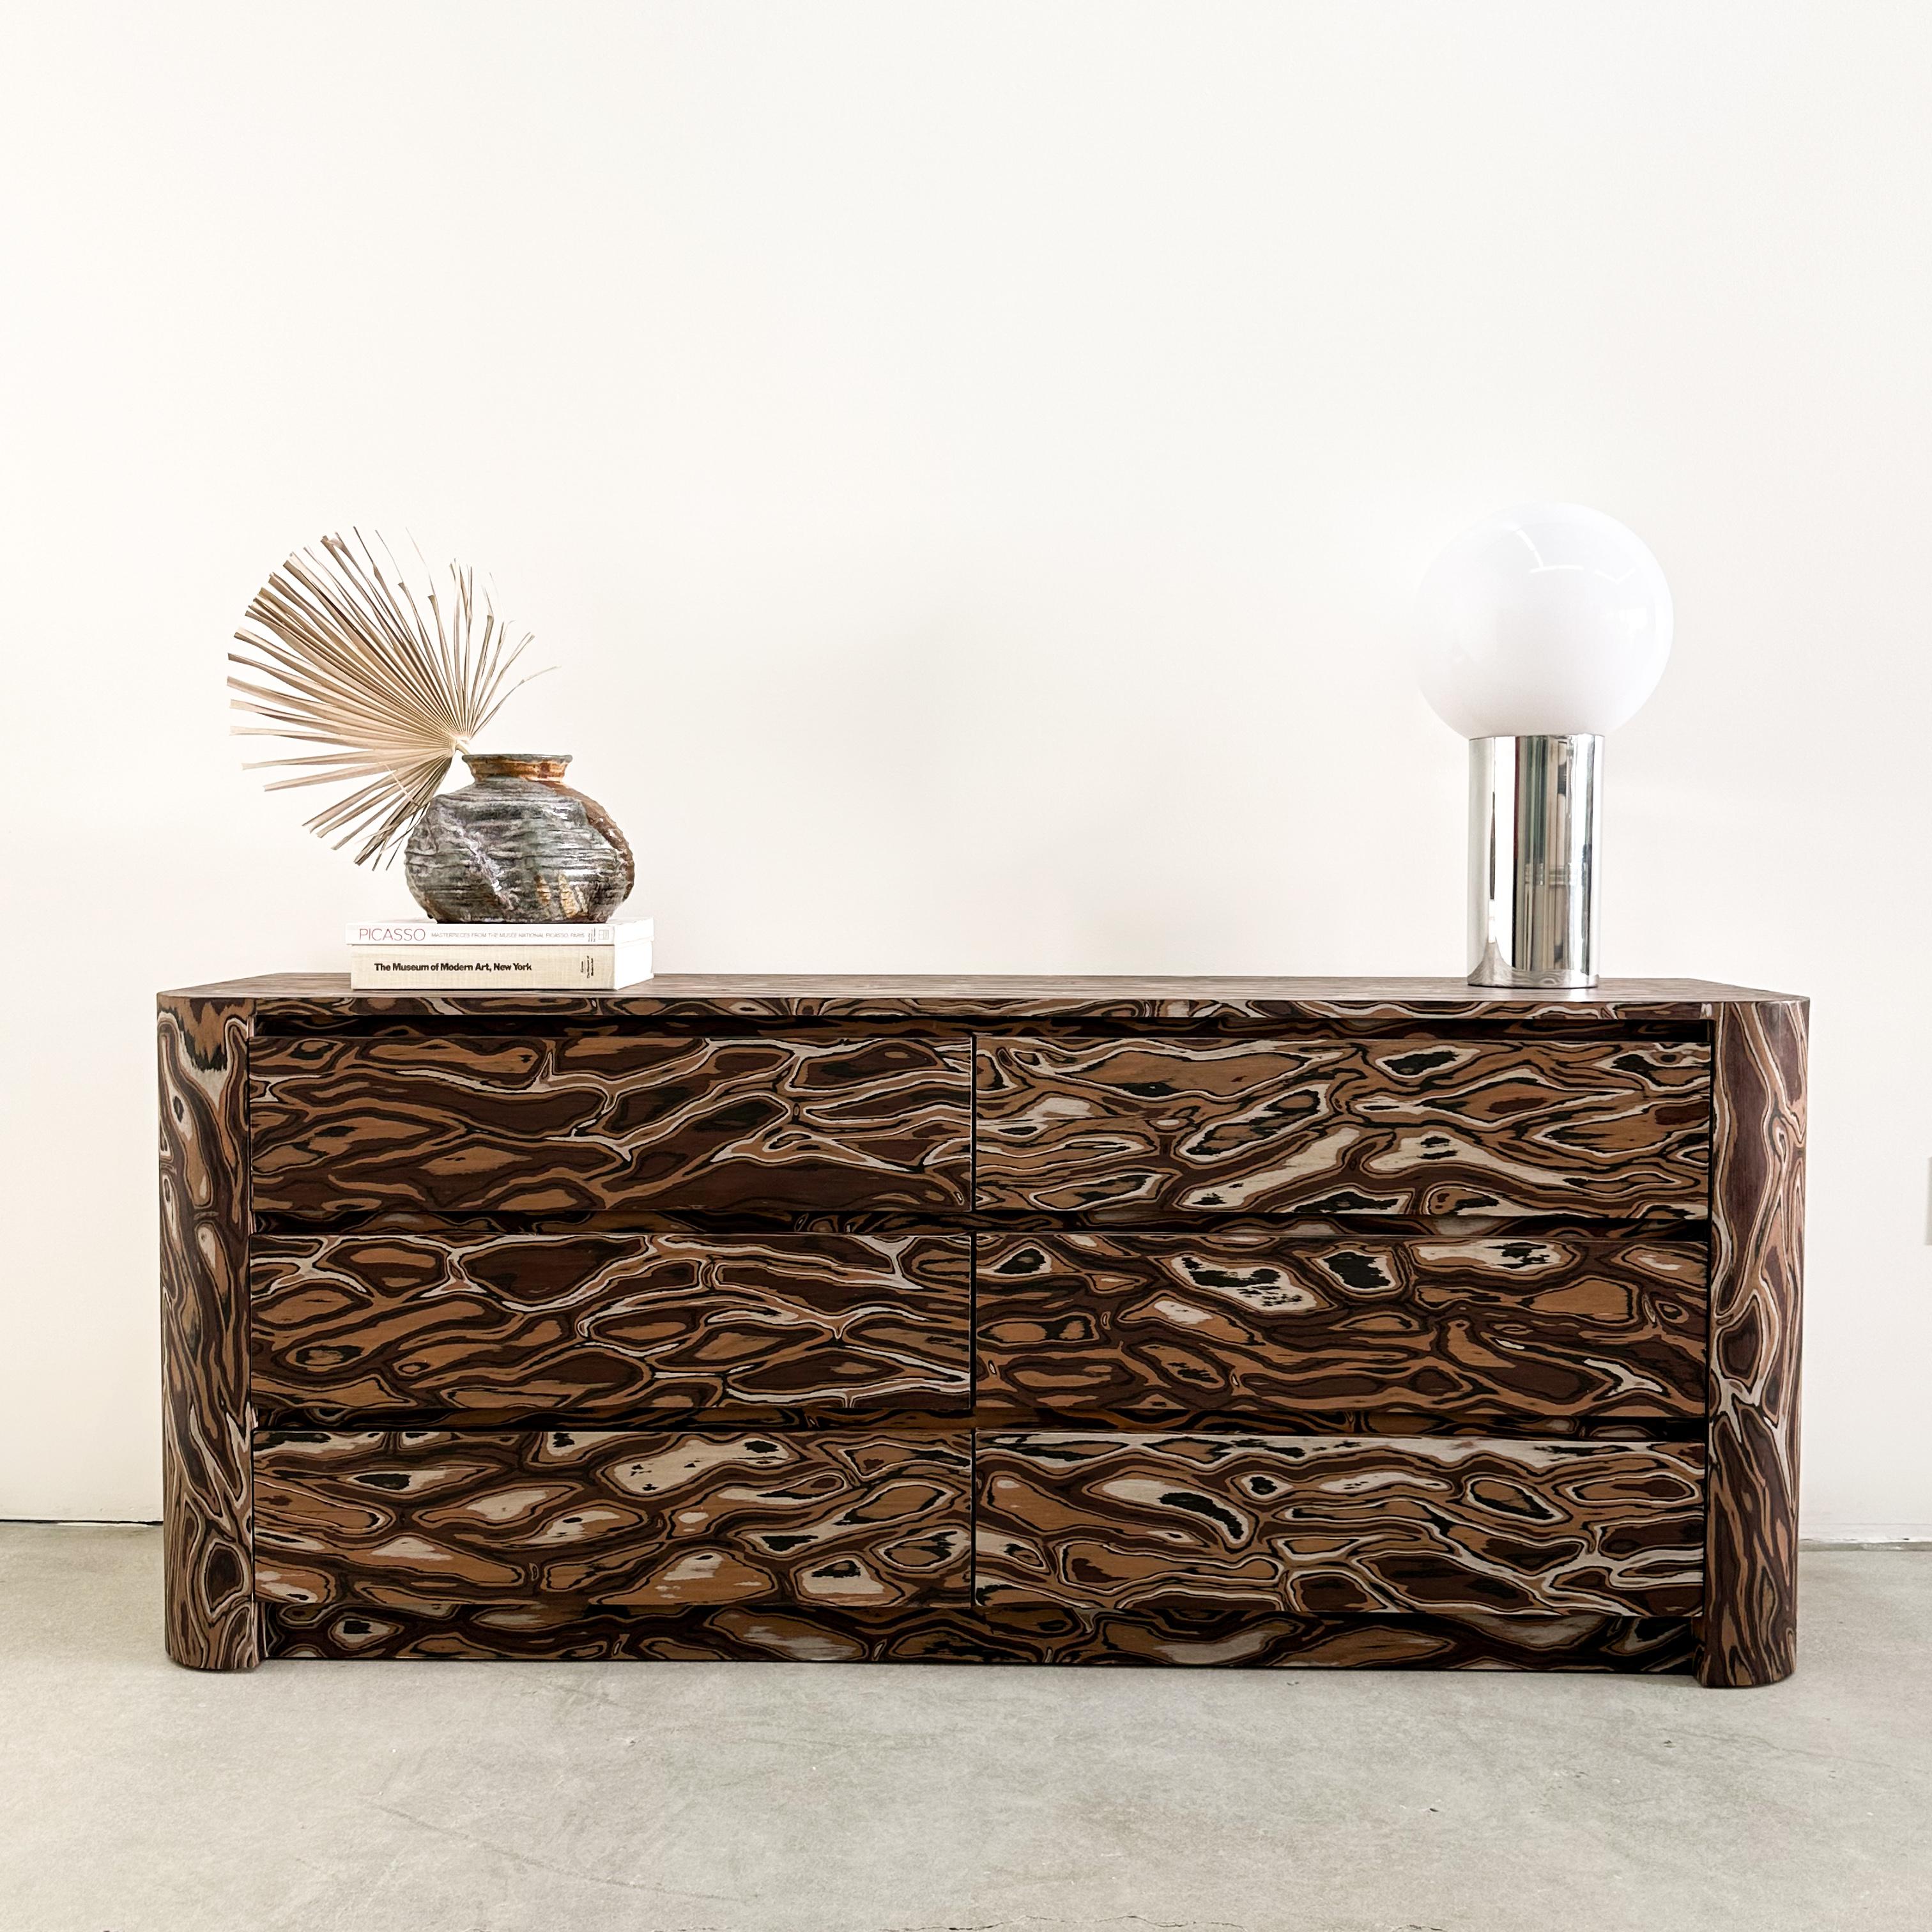 Vintage Dresser Featuring Kengo Kuma Veneer.

The vintage dresser has been meticulously re-veneered, featuring the original design by Kengo Kuma, a renowned architect recognized for his adept use of natural materials to craft contemporary spaces